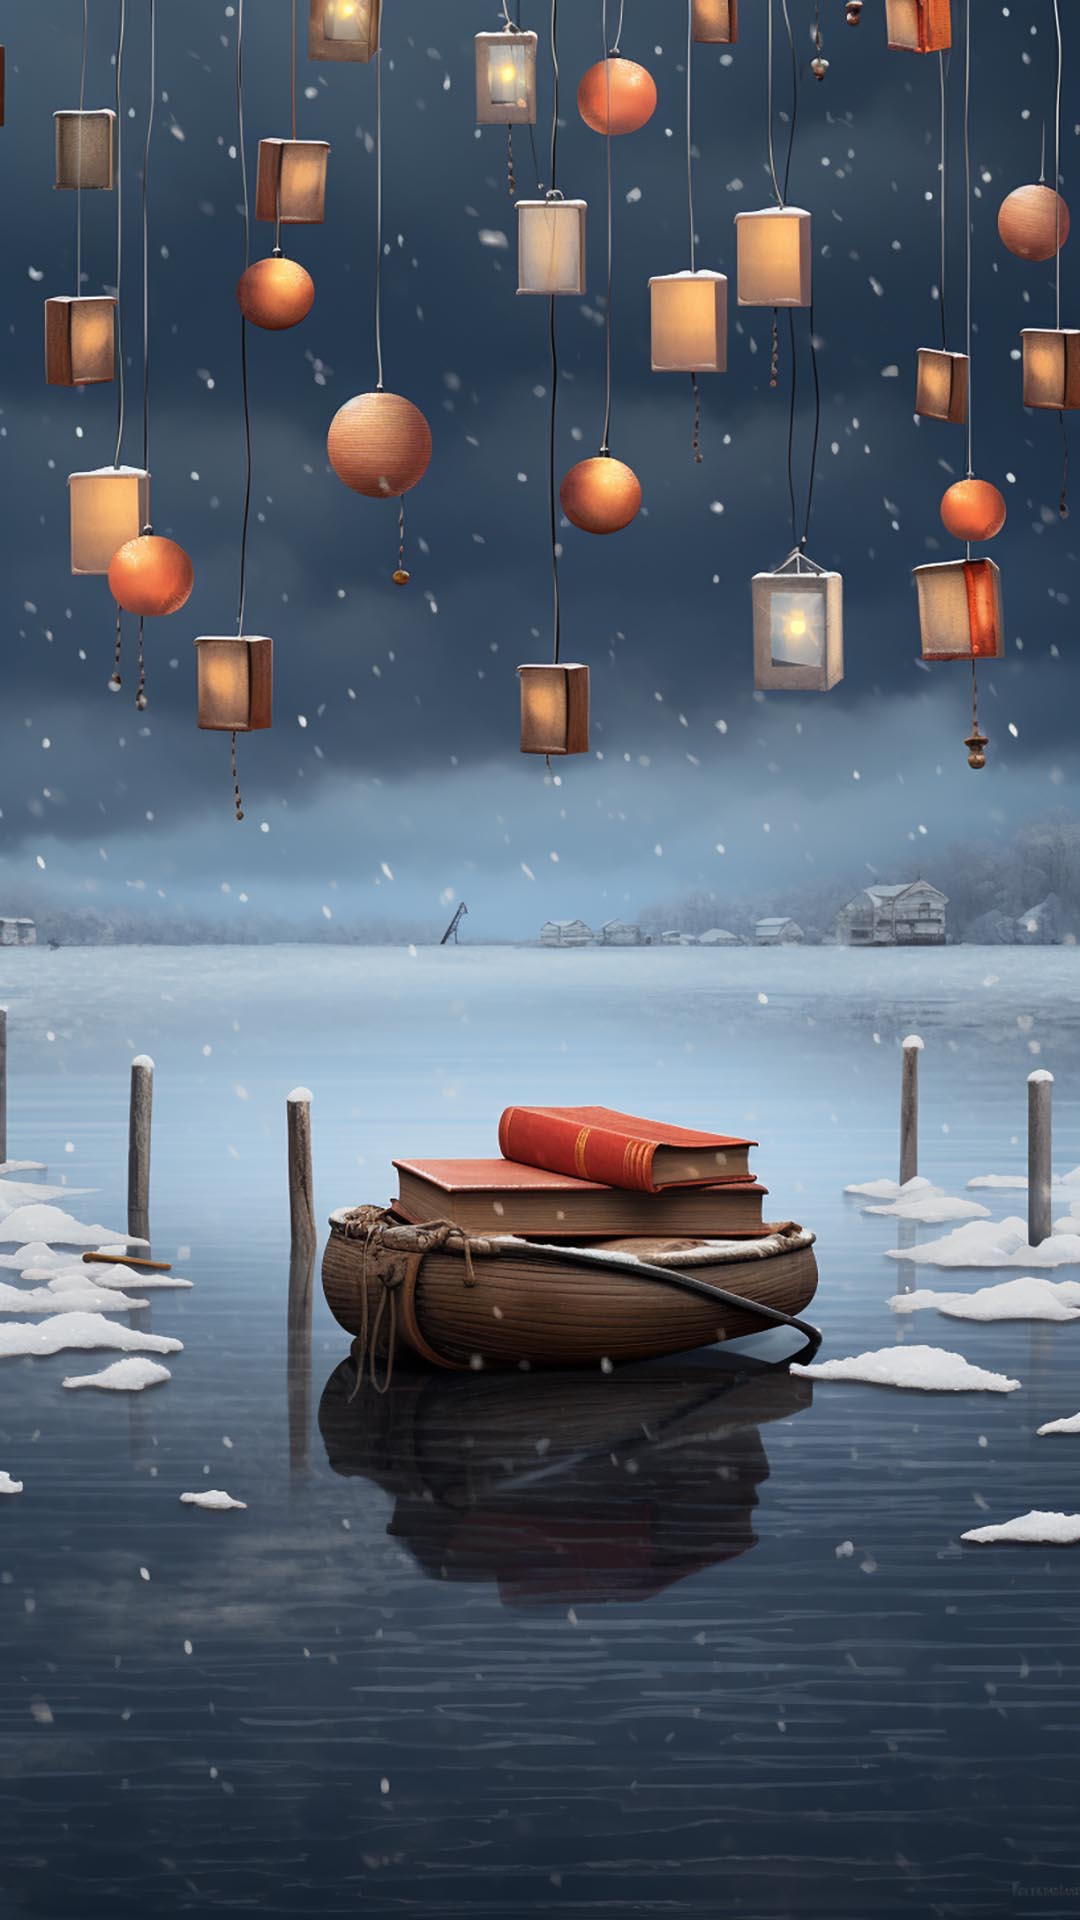 Floating lanterns over small boat carrying books wallpaper